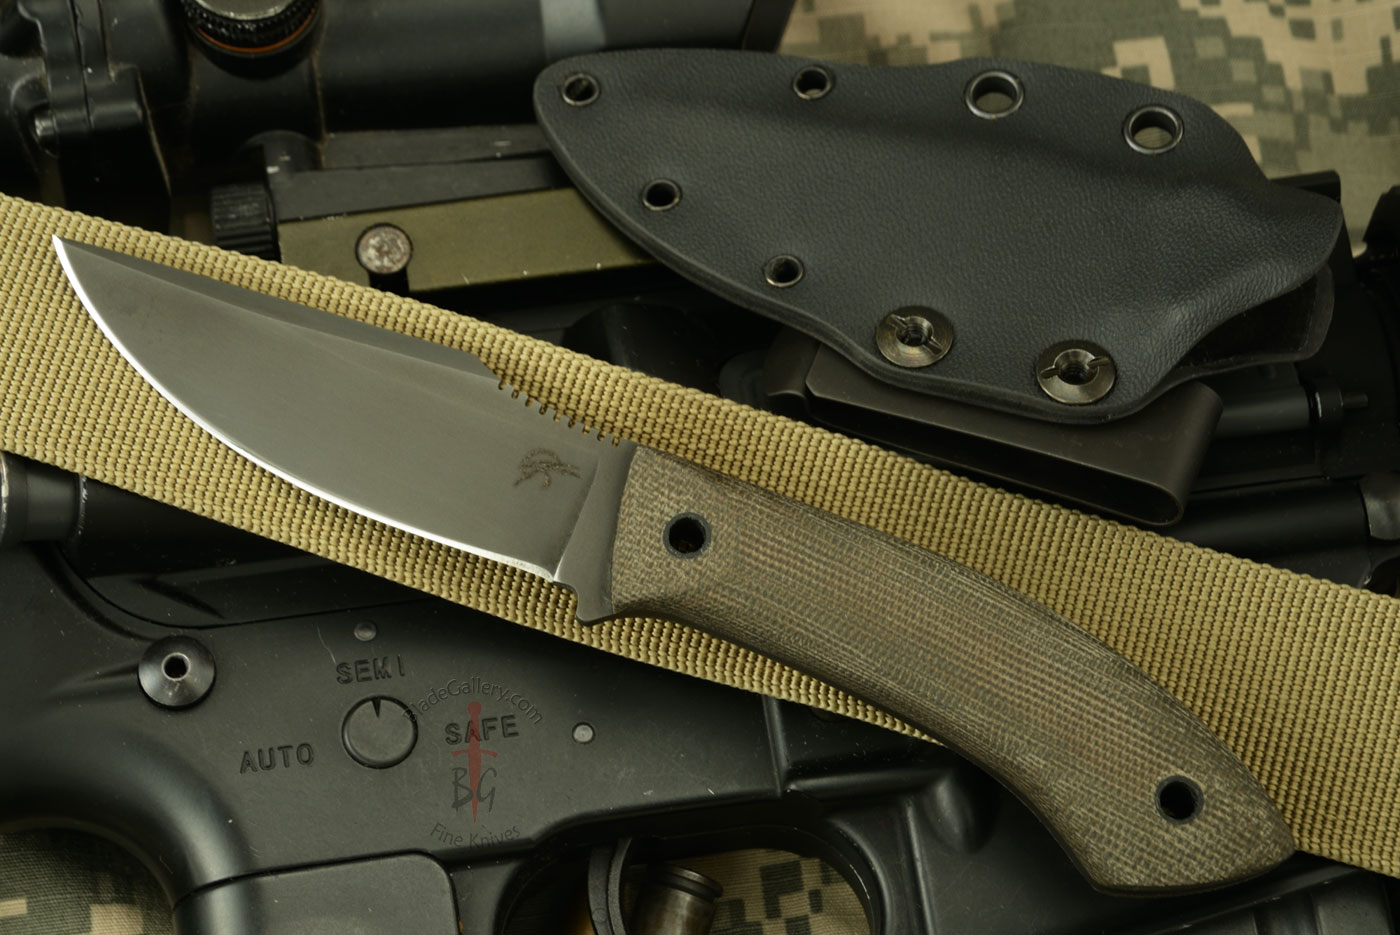 Everycarry with Green Micarta (Jason Knight Collaboration)